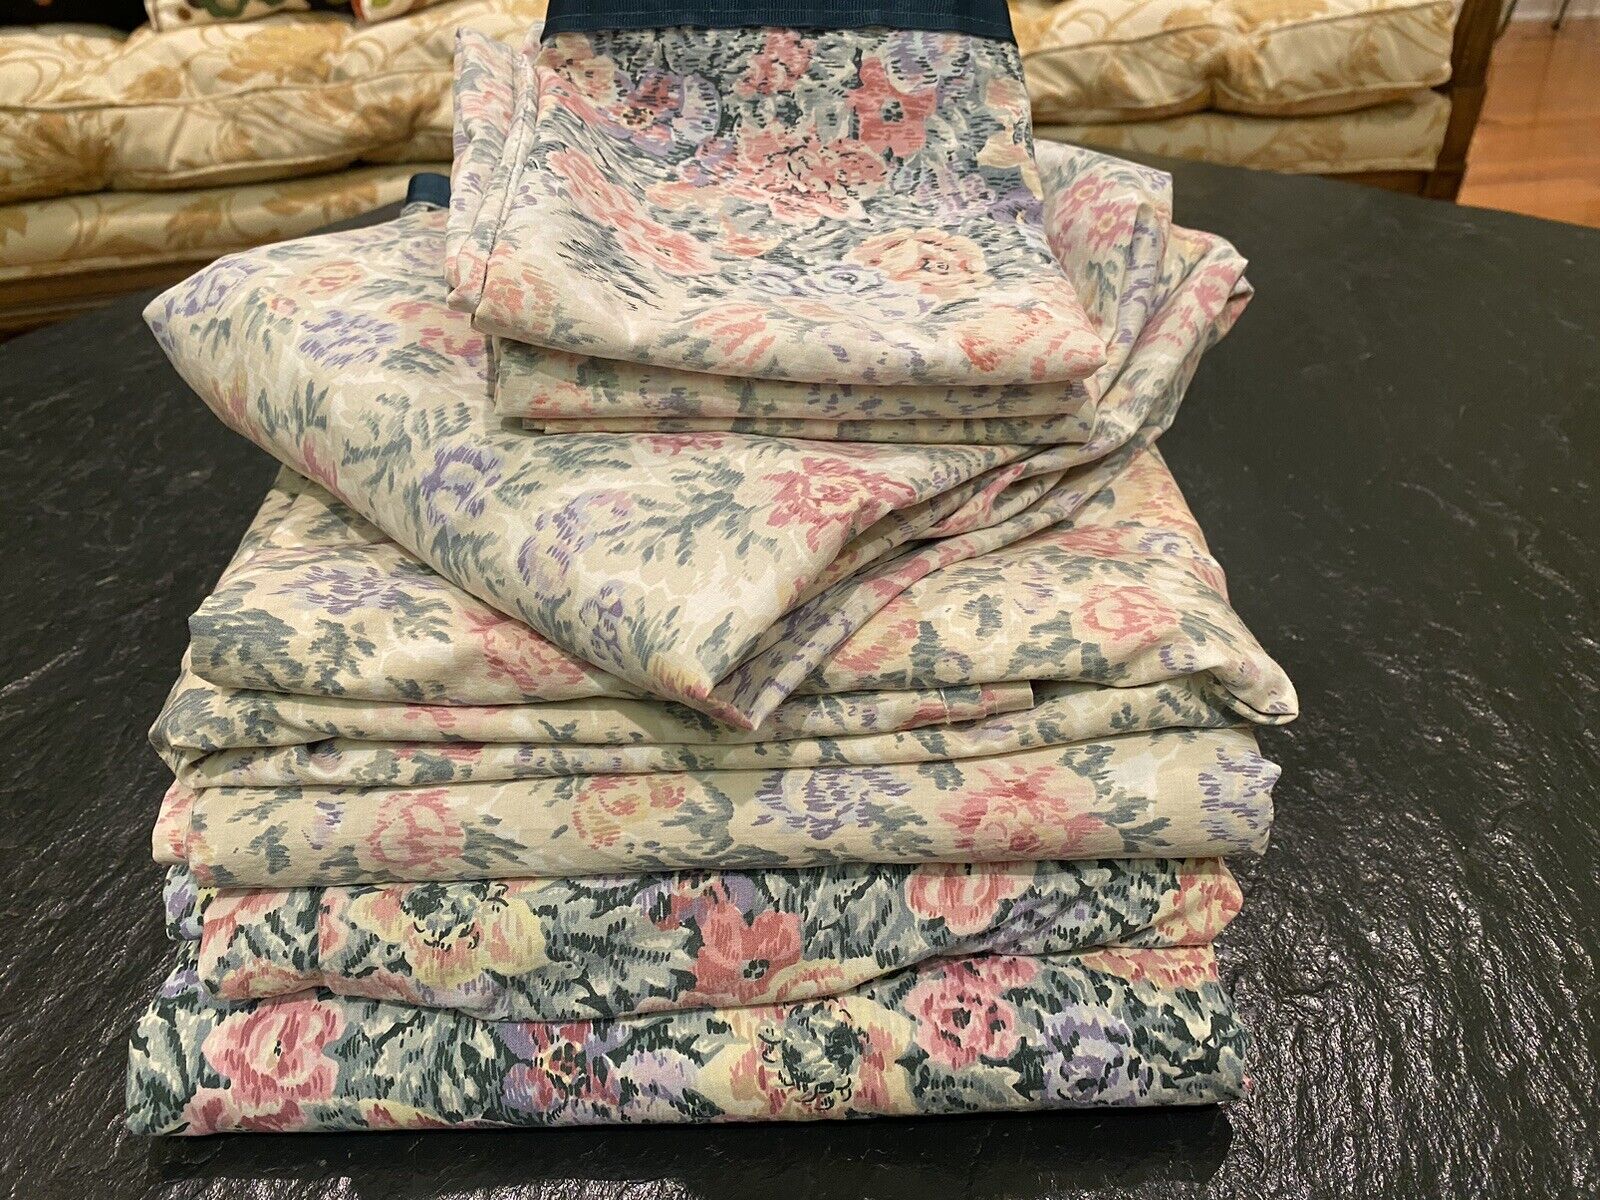 Vintage 8 Pc / 2 Twin Bed COLLECTION Duvet Covers & Sheets Floral Shabby Chic